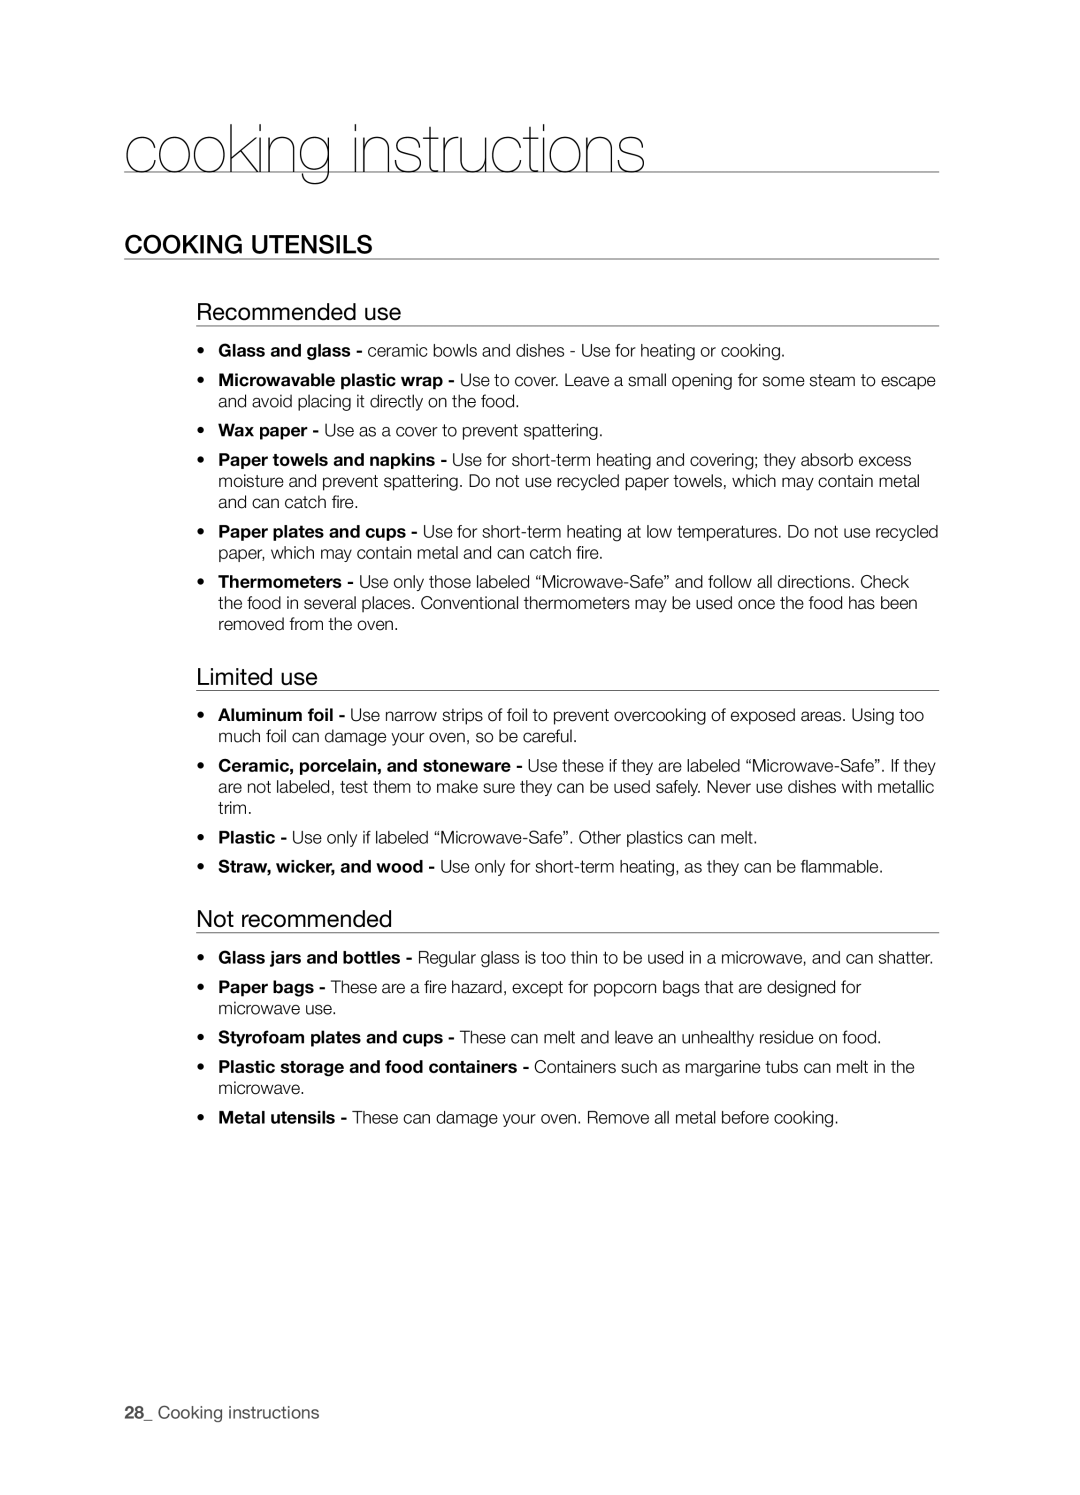 Samsung SMH6165 user manual cooking instructions, Cooking utensils, Recommended use, Limited use, Not recommended 